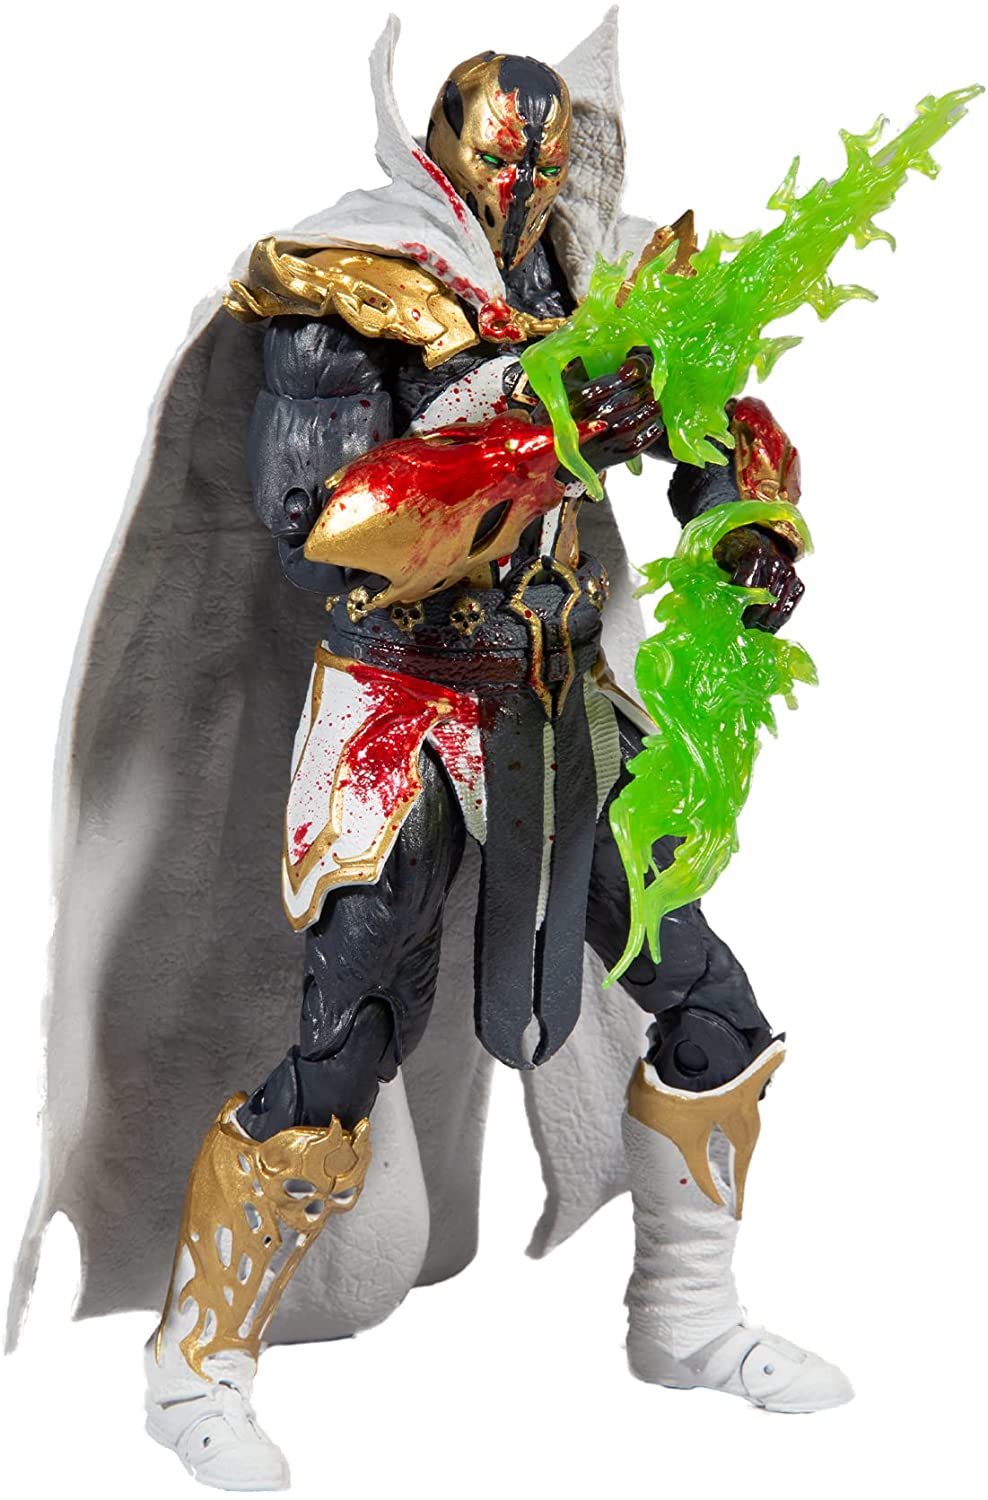 Mortal Kombat Malefik Spawn Bloody Disciple 7" Action Figure with Accessories - Action & Toy Figures Heretoserveyou